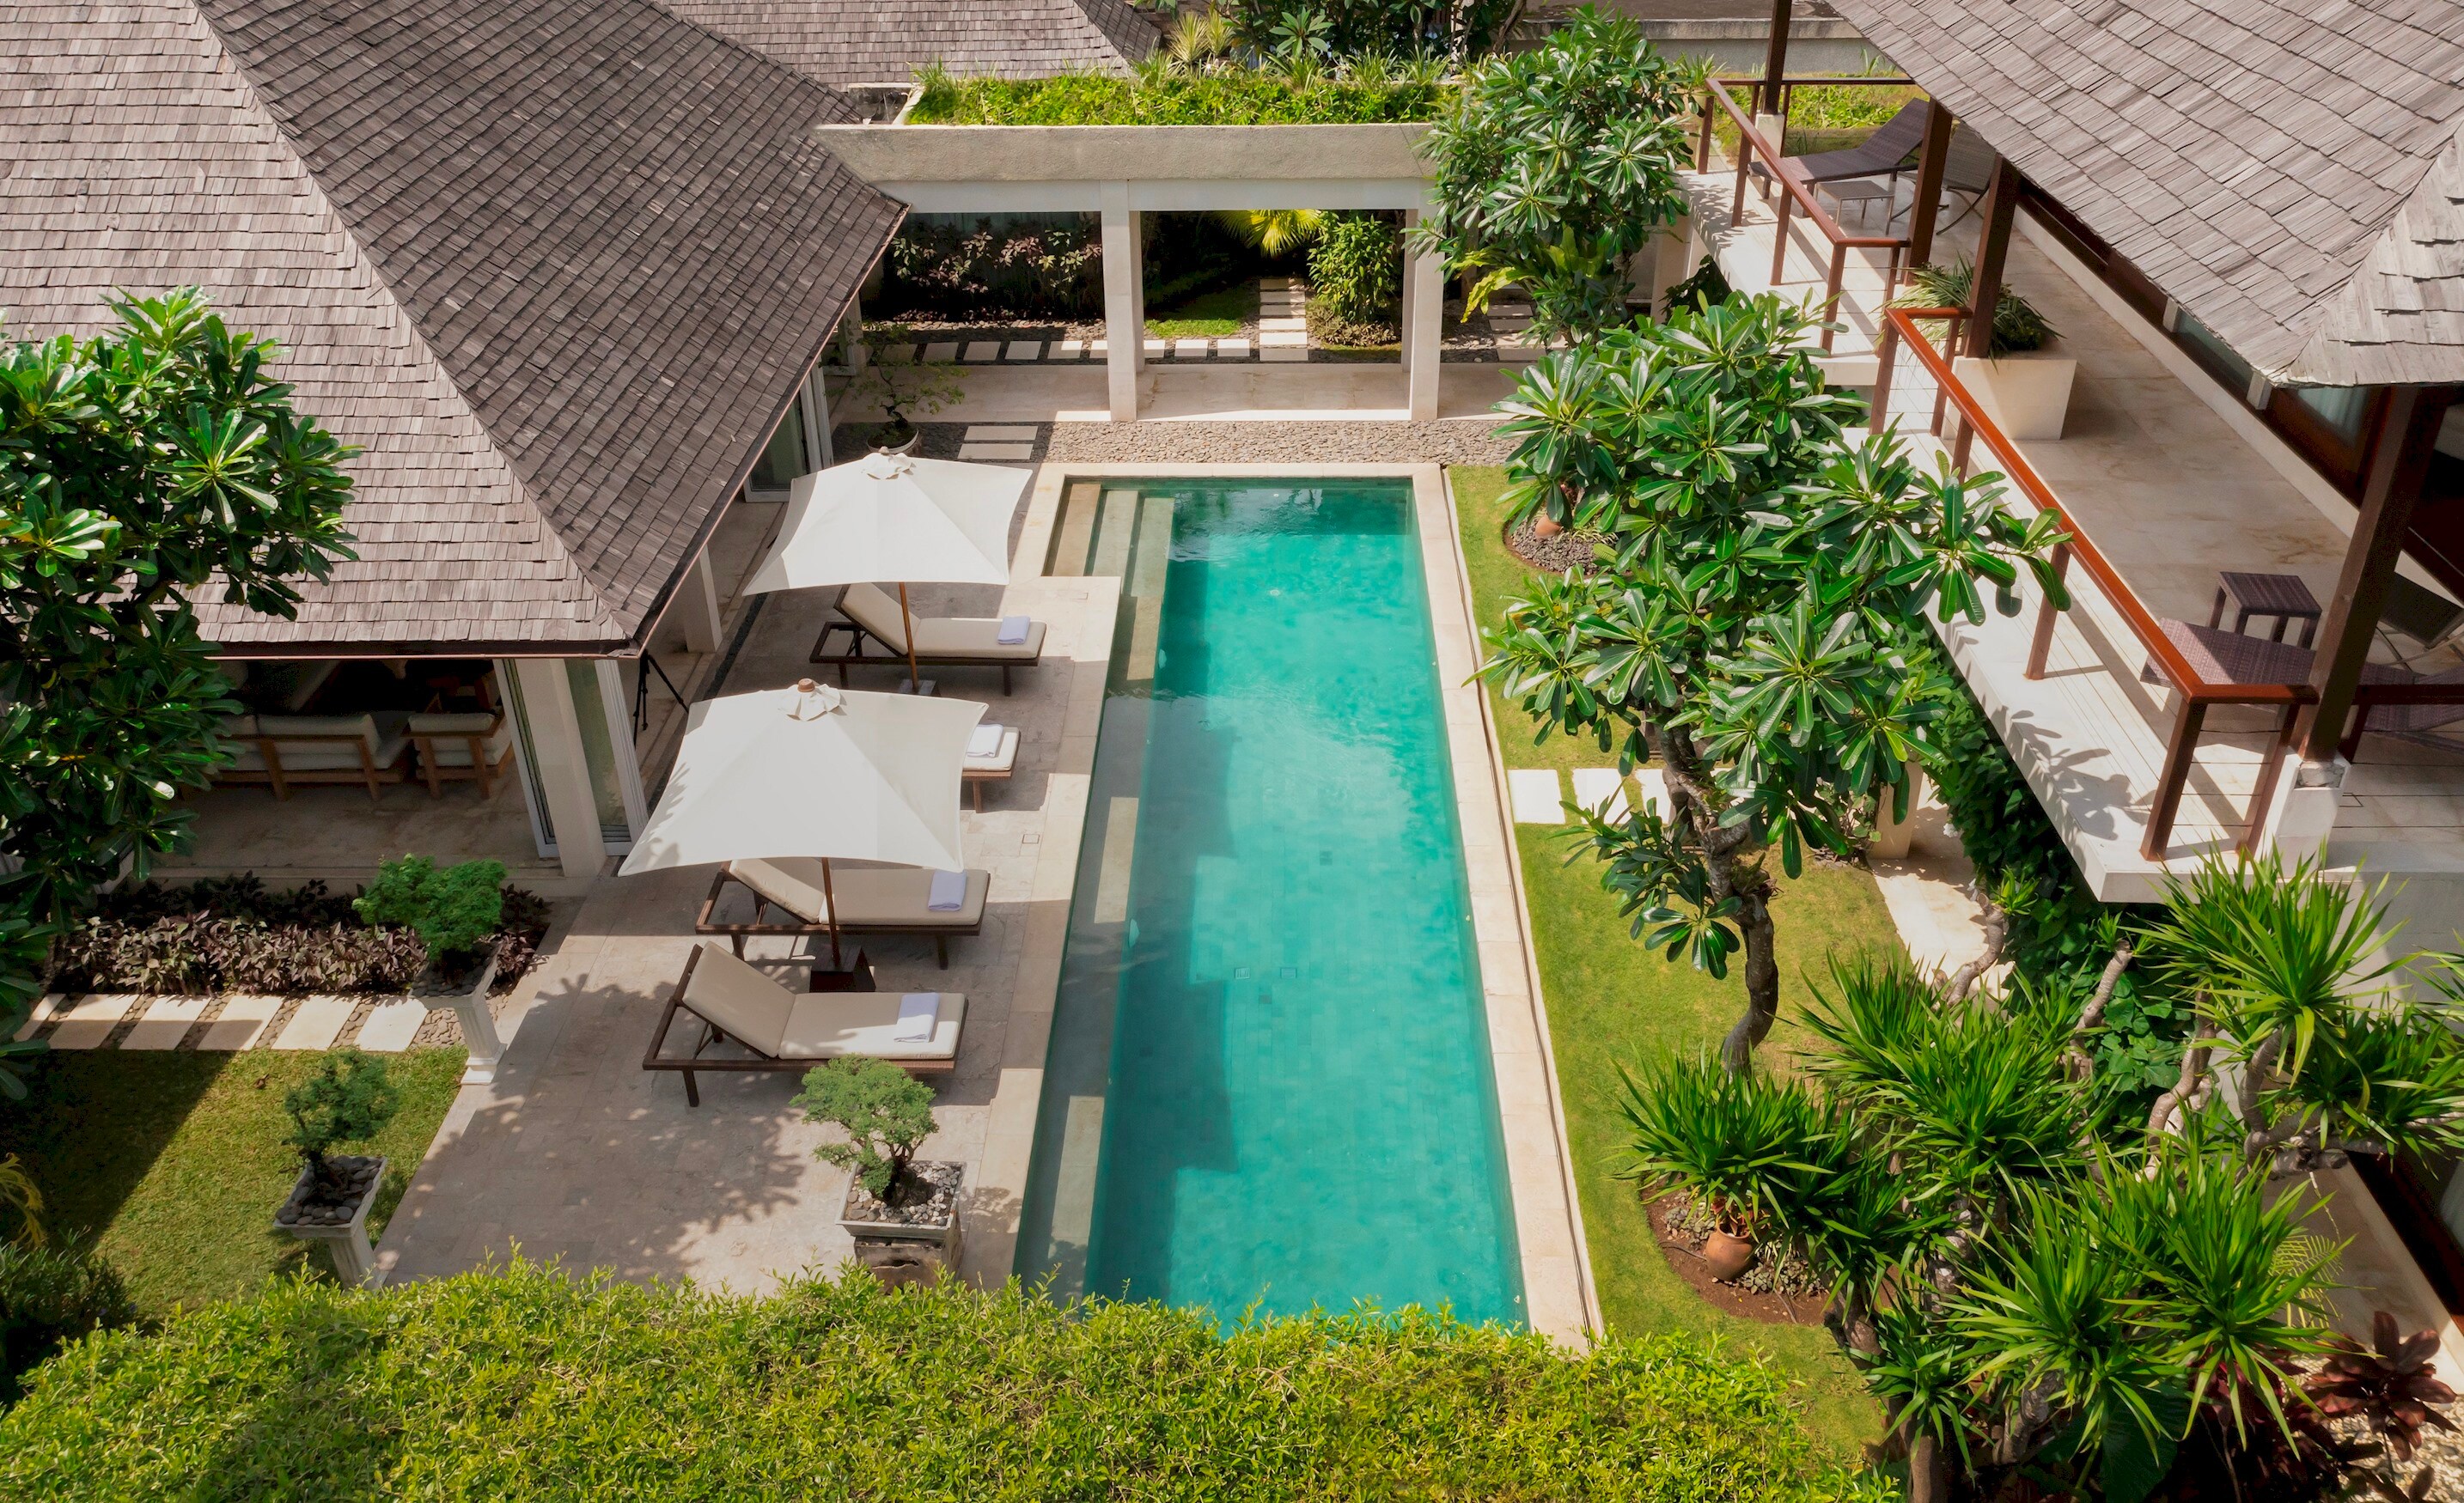 Property Image 2 - Sensational Gleaming Villa with Private Pool in Bali